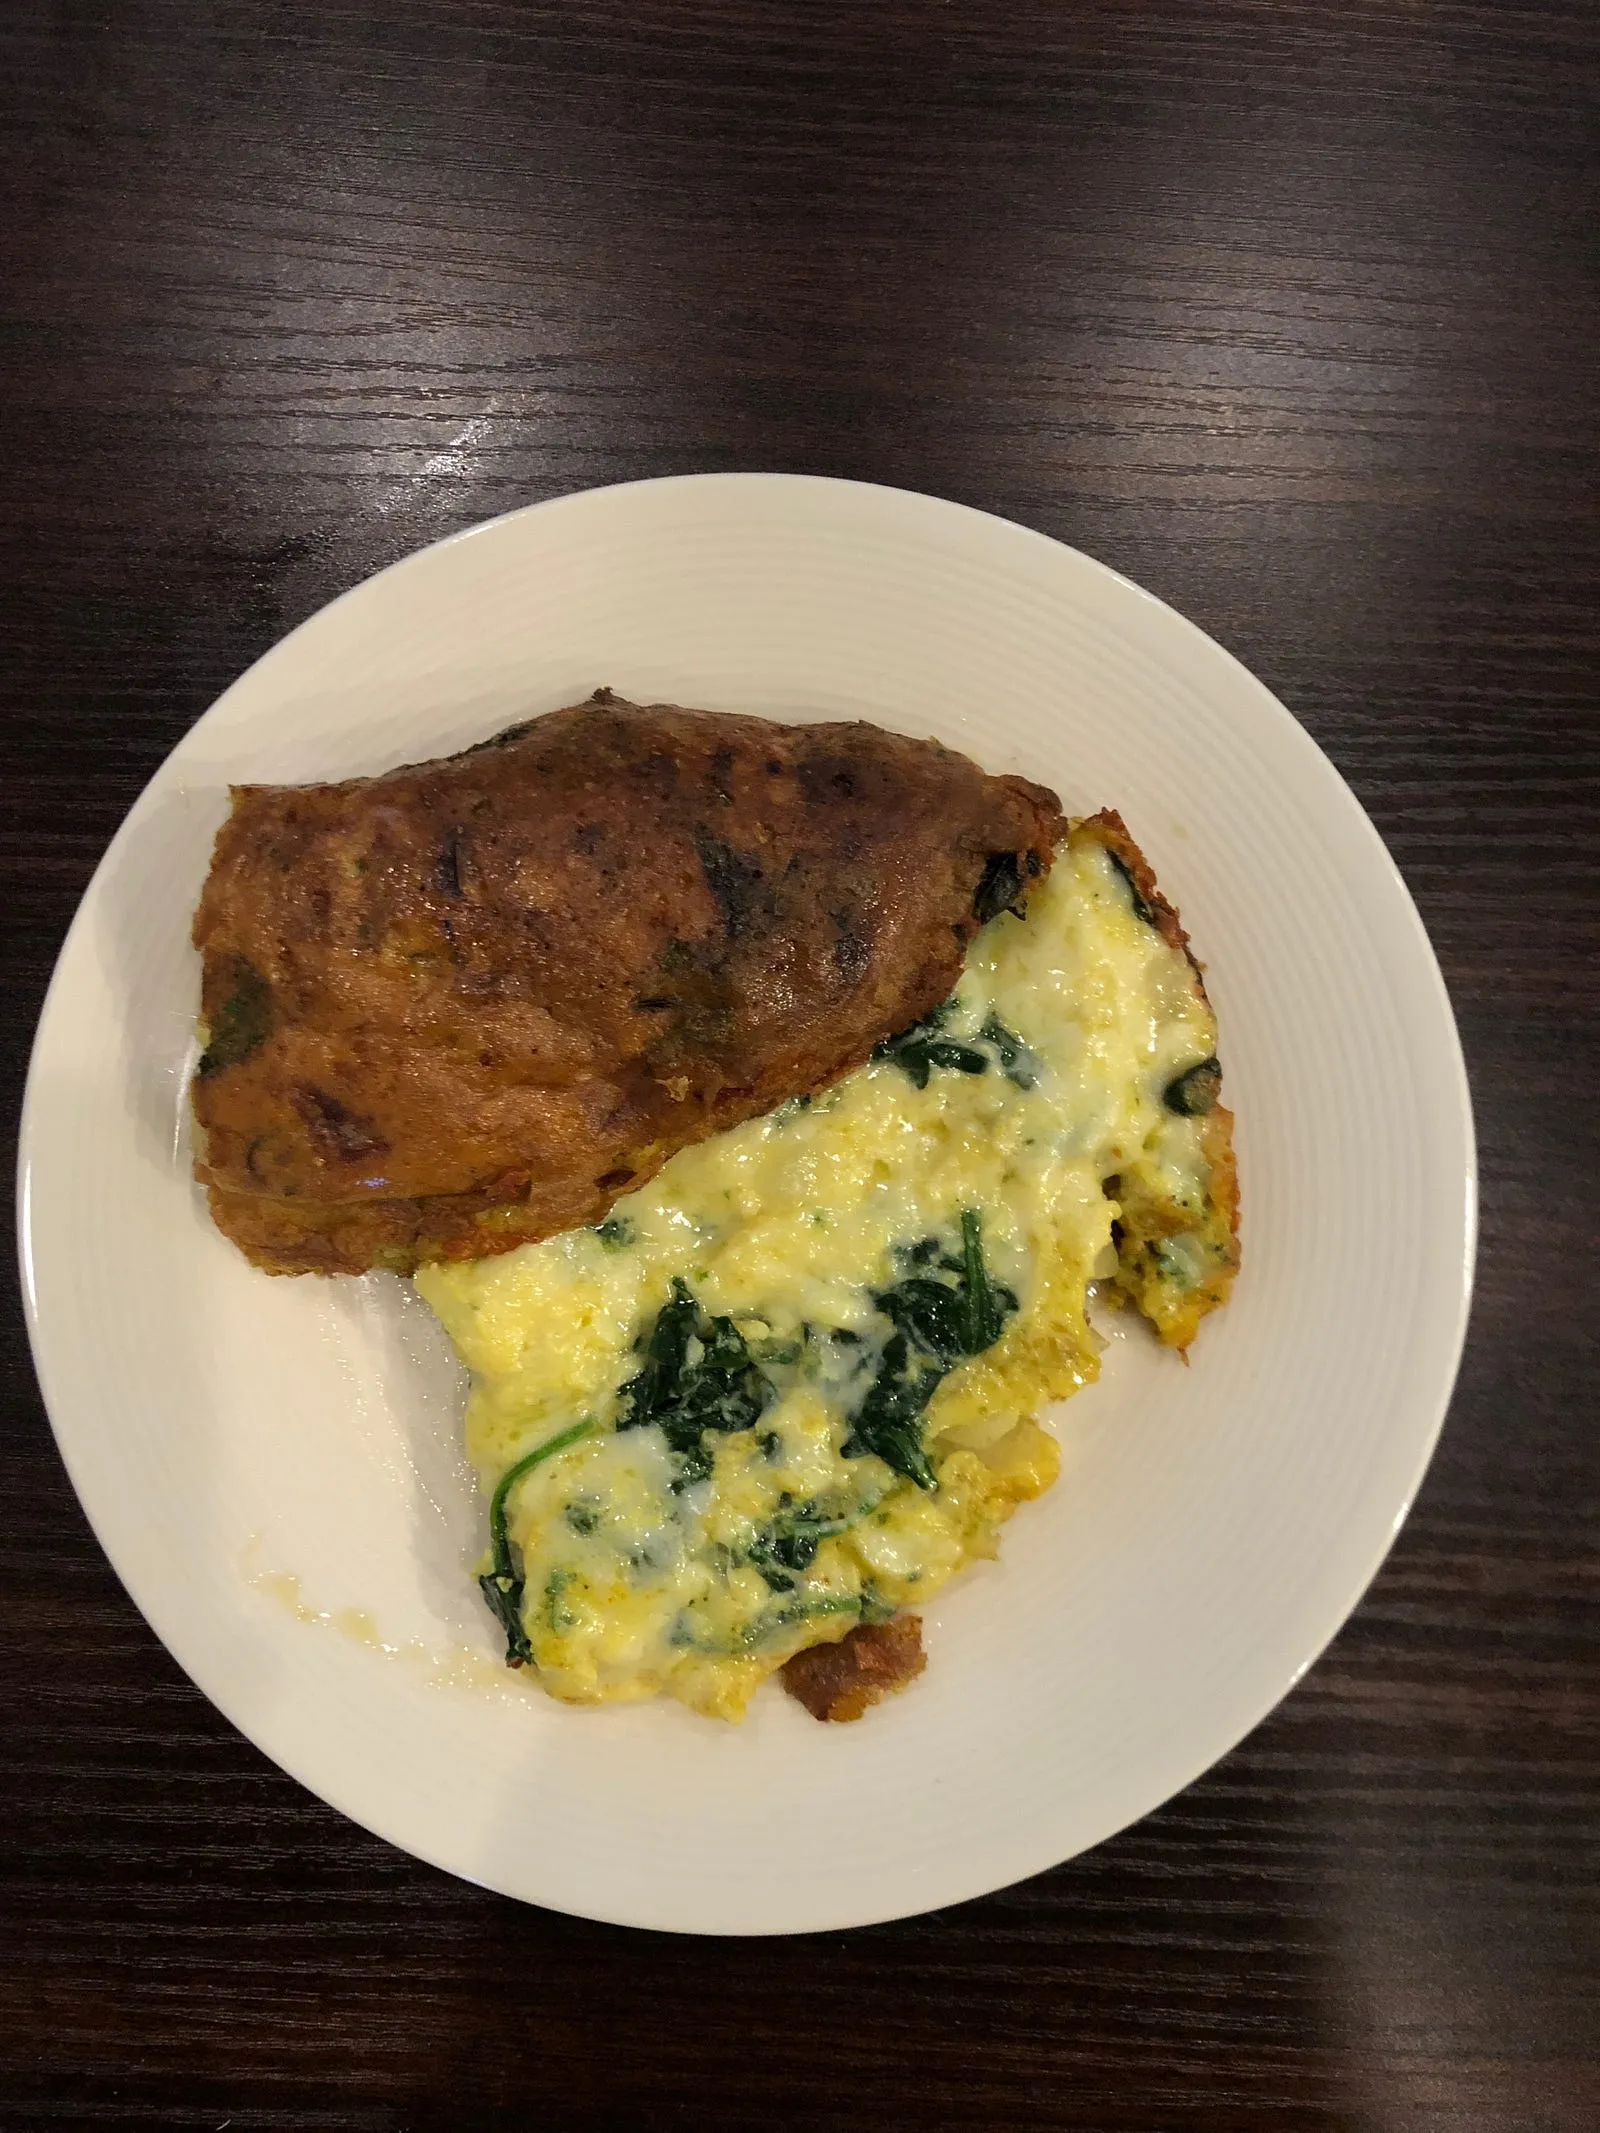 Egg omelette with spinach, green pepper, onions and cheddar cheese.